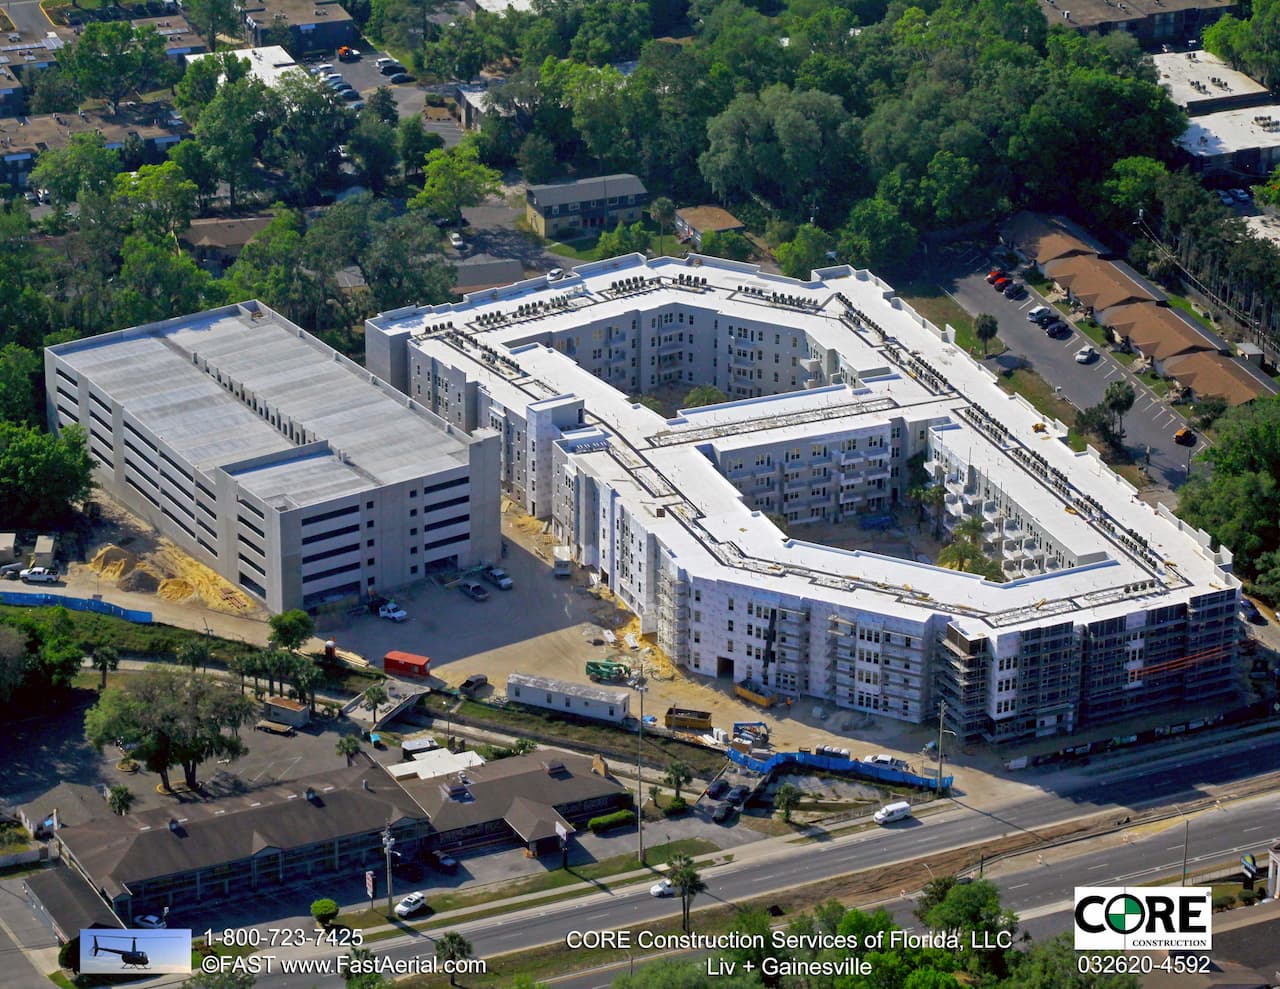 Aerial View of Construction Work at LIV+ Gainesville Apartments